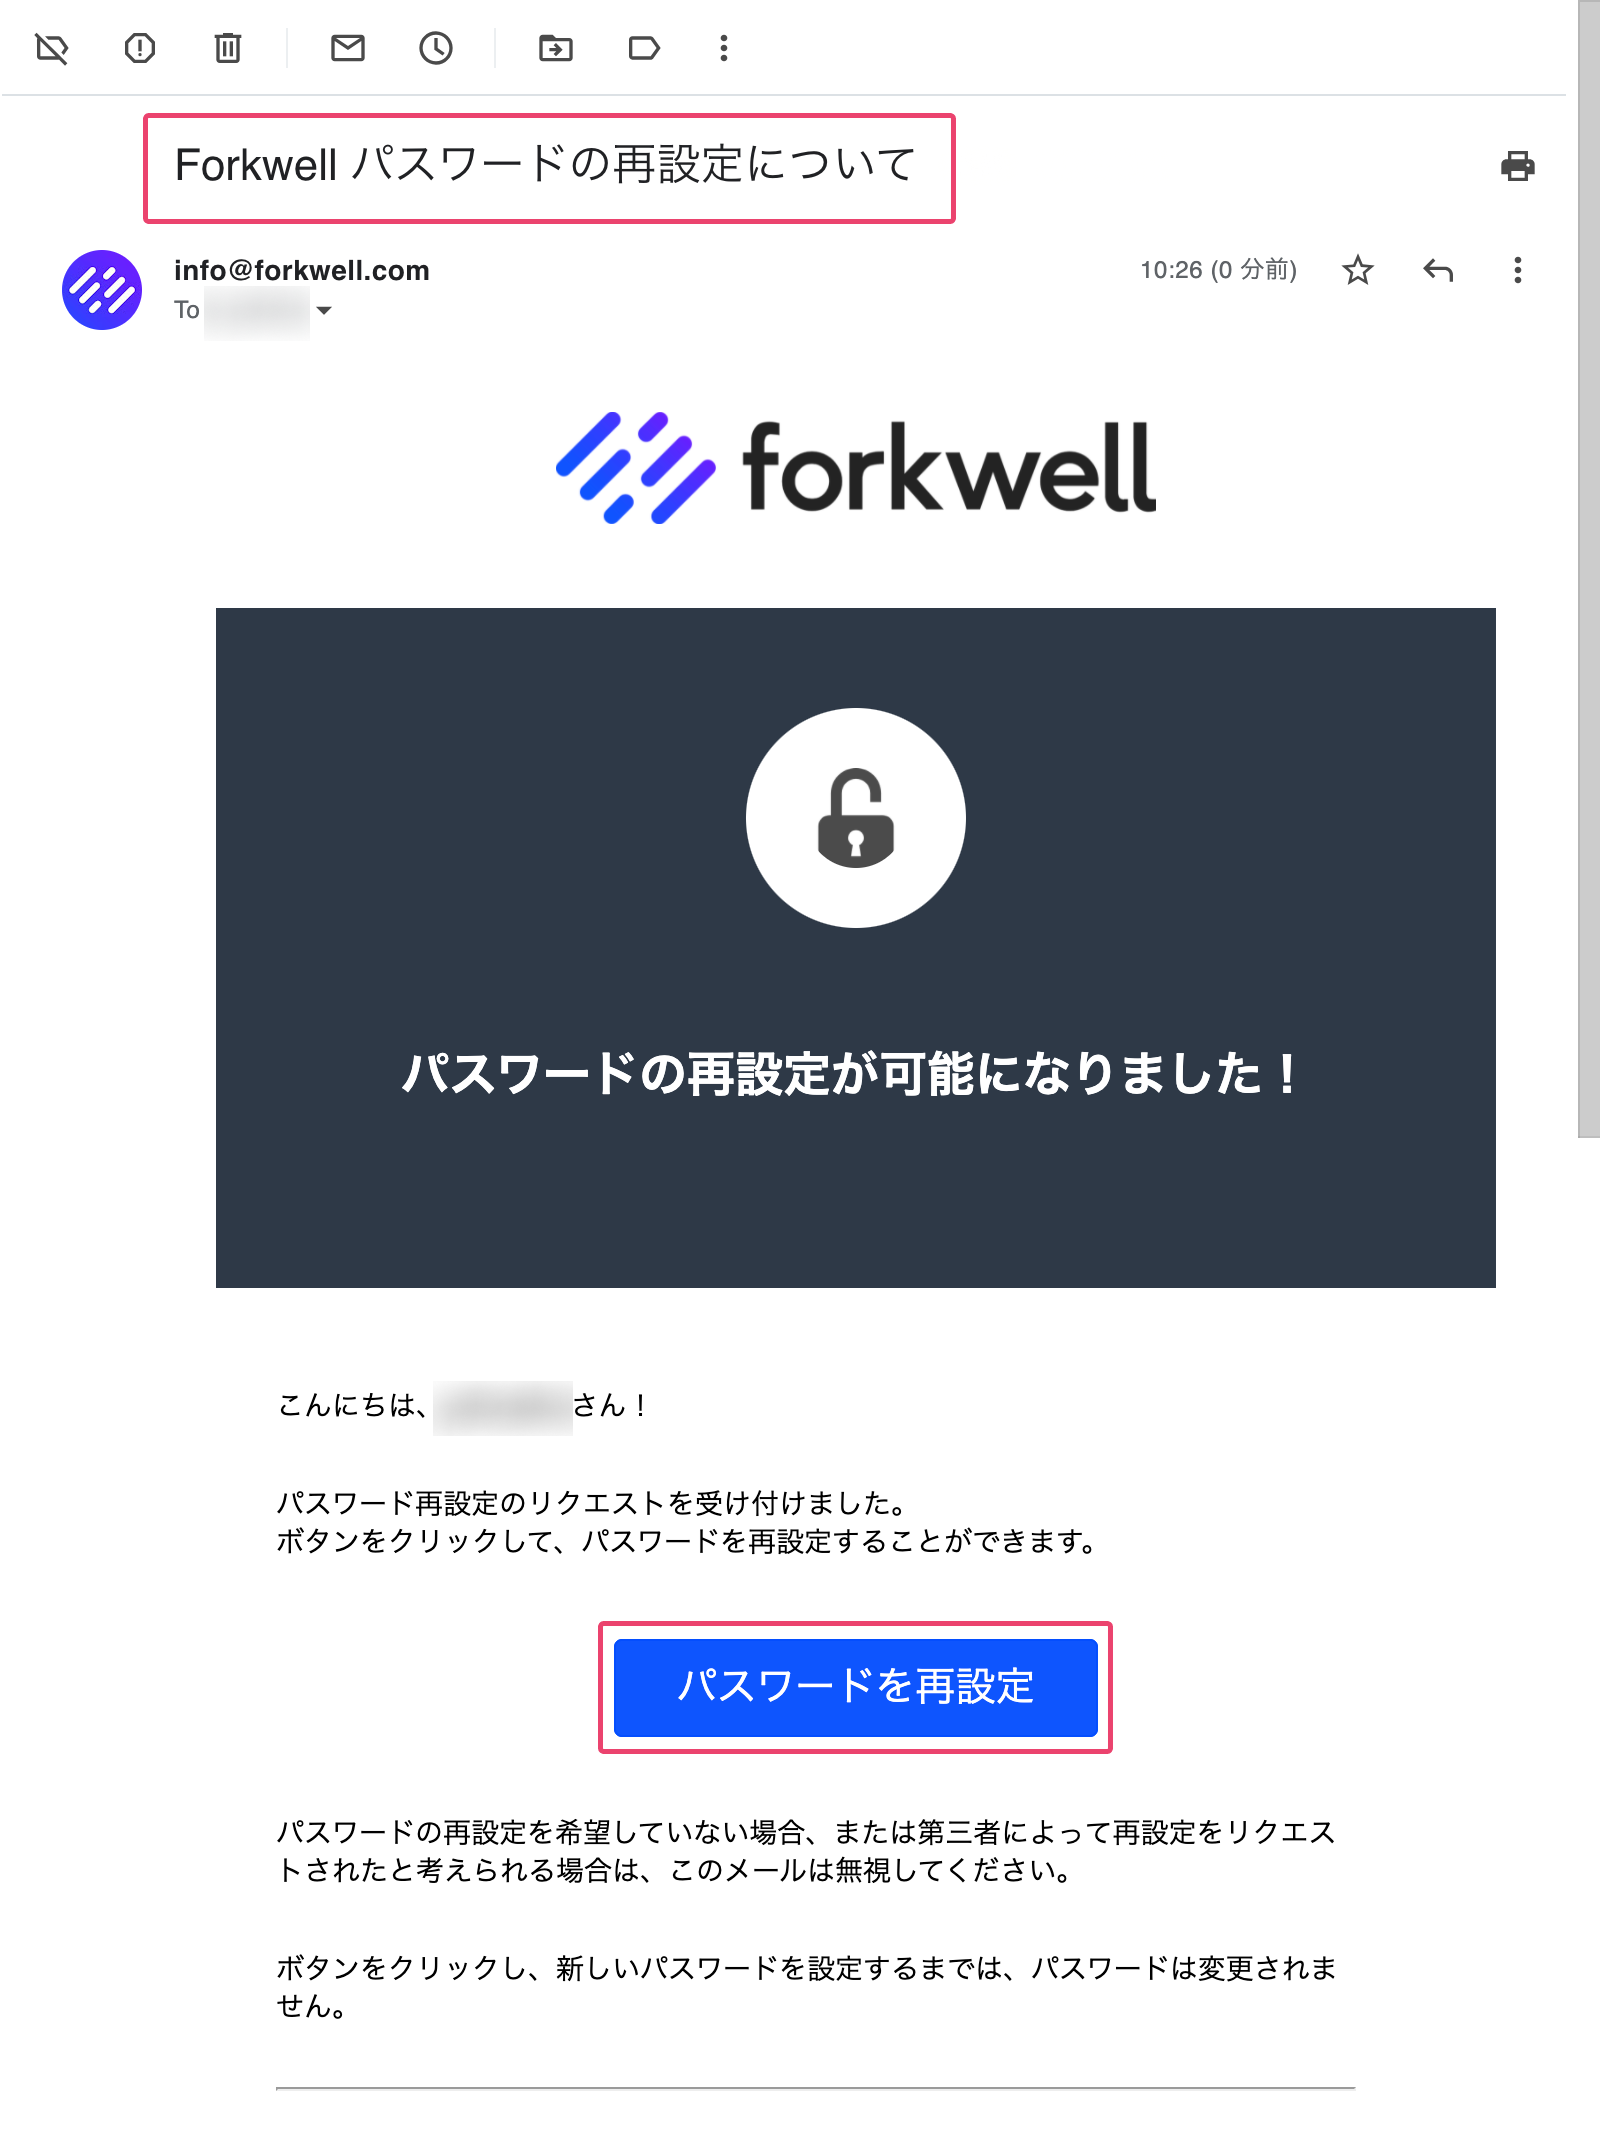 A_5.___________Forkwell____________________.png